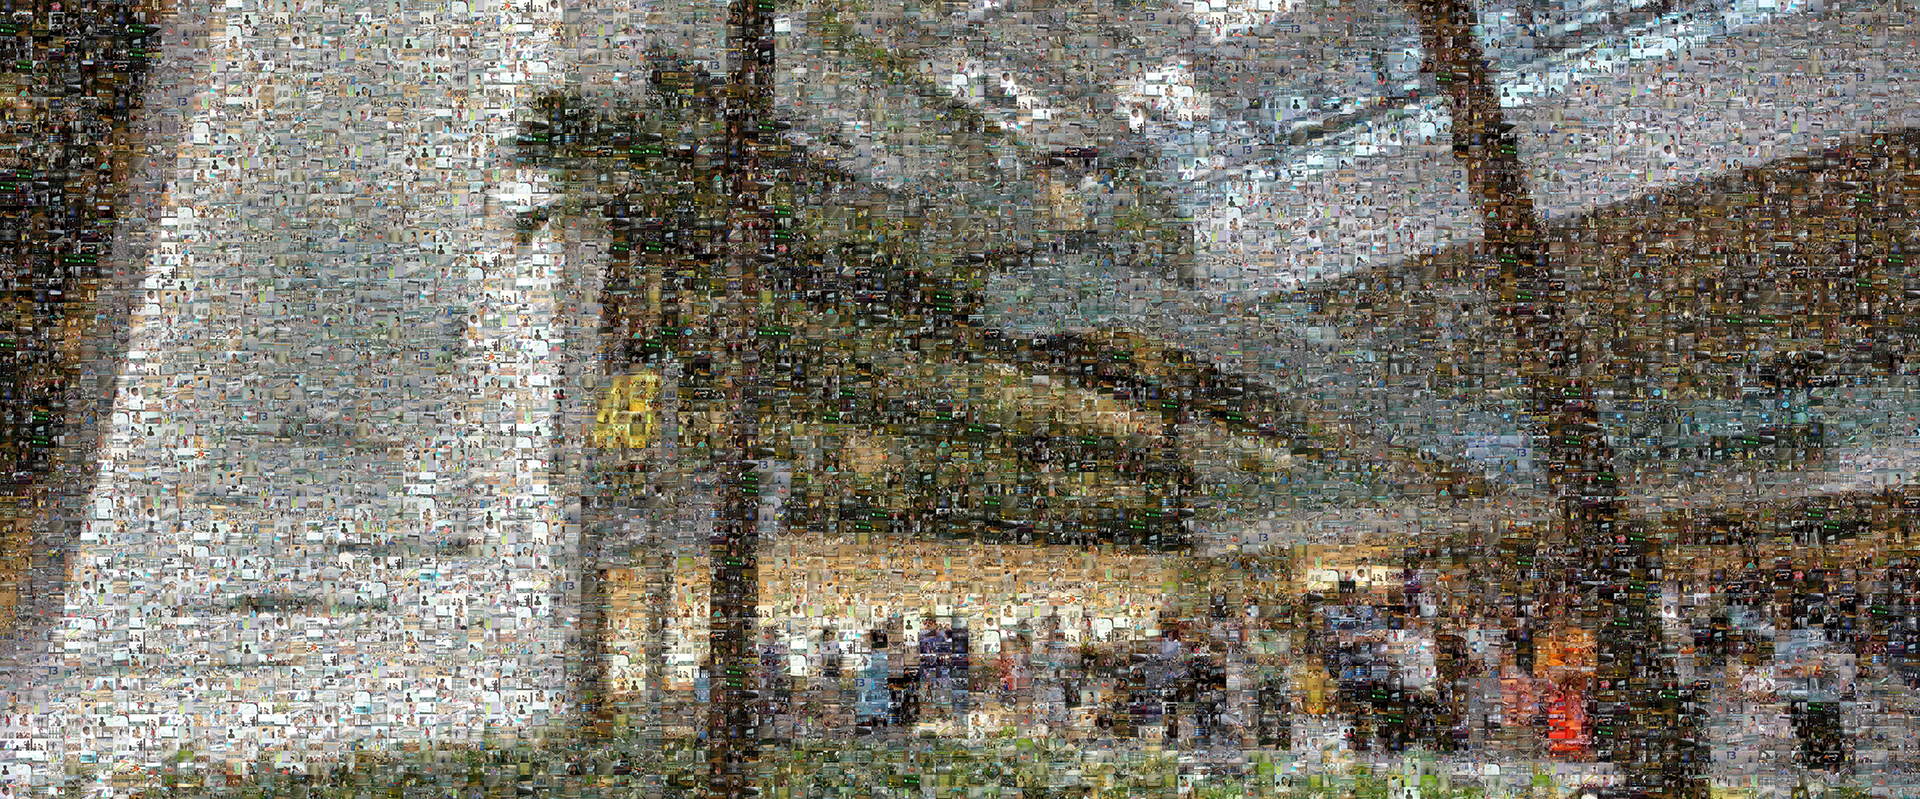 photo mosaic 12x24 foot permanent mural within the new Singapore T3 airport created using over 1100 traveler submitted photos